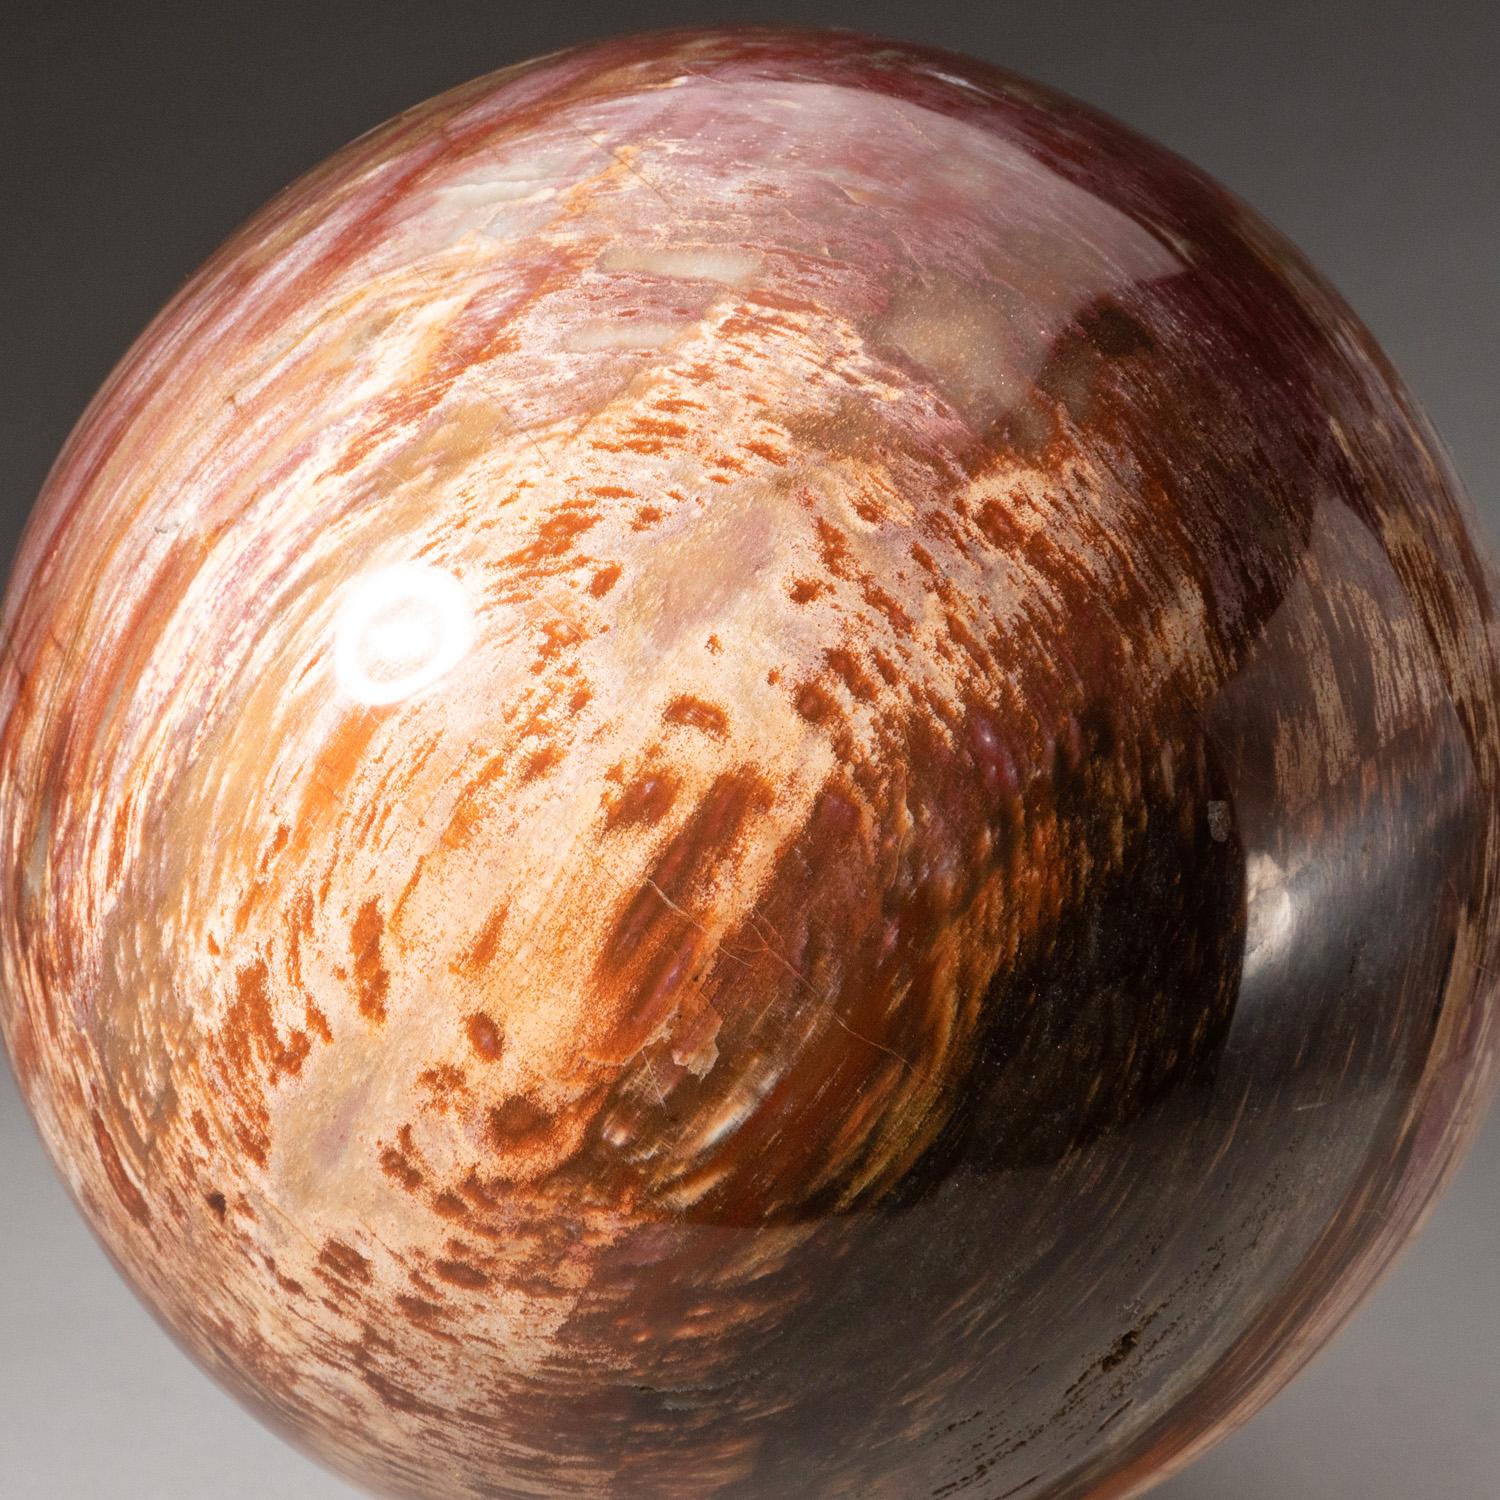 Top quality, center-of-a-choice petrified wood sphere from Madagascar. This incredible specimen is shaped from a solid piece of petrified wood. Hand-polished to a mirrored finish. It has an amazing pattern with vibrant hues of brown, red, and